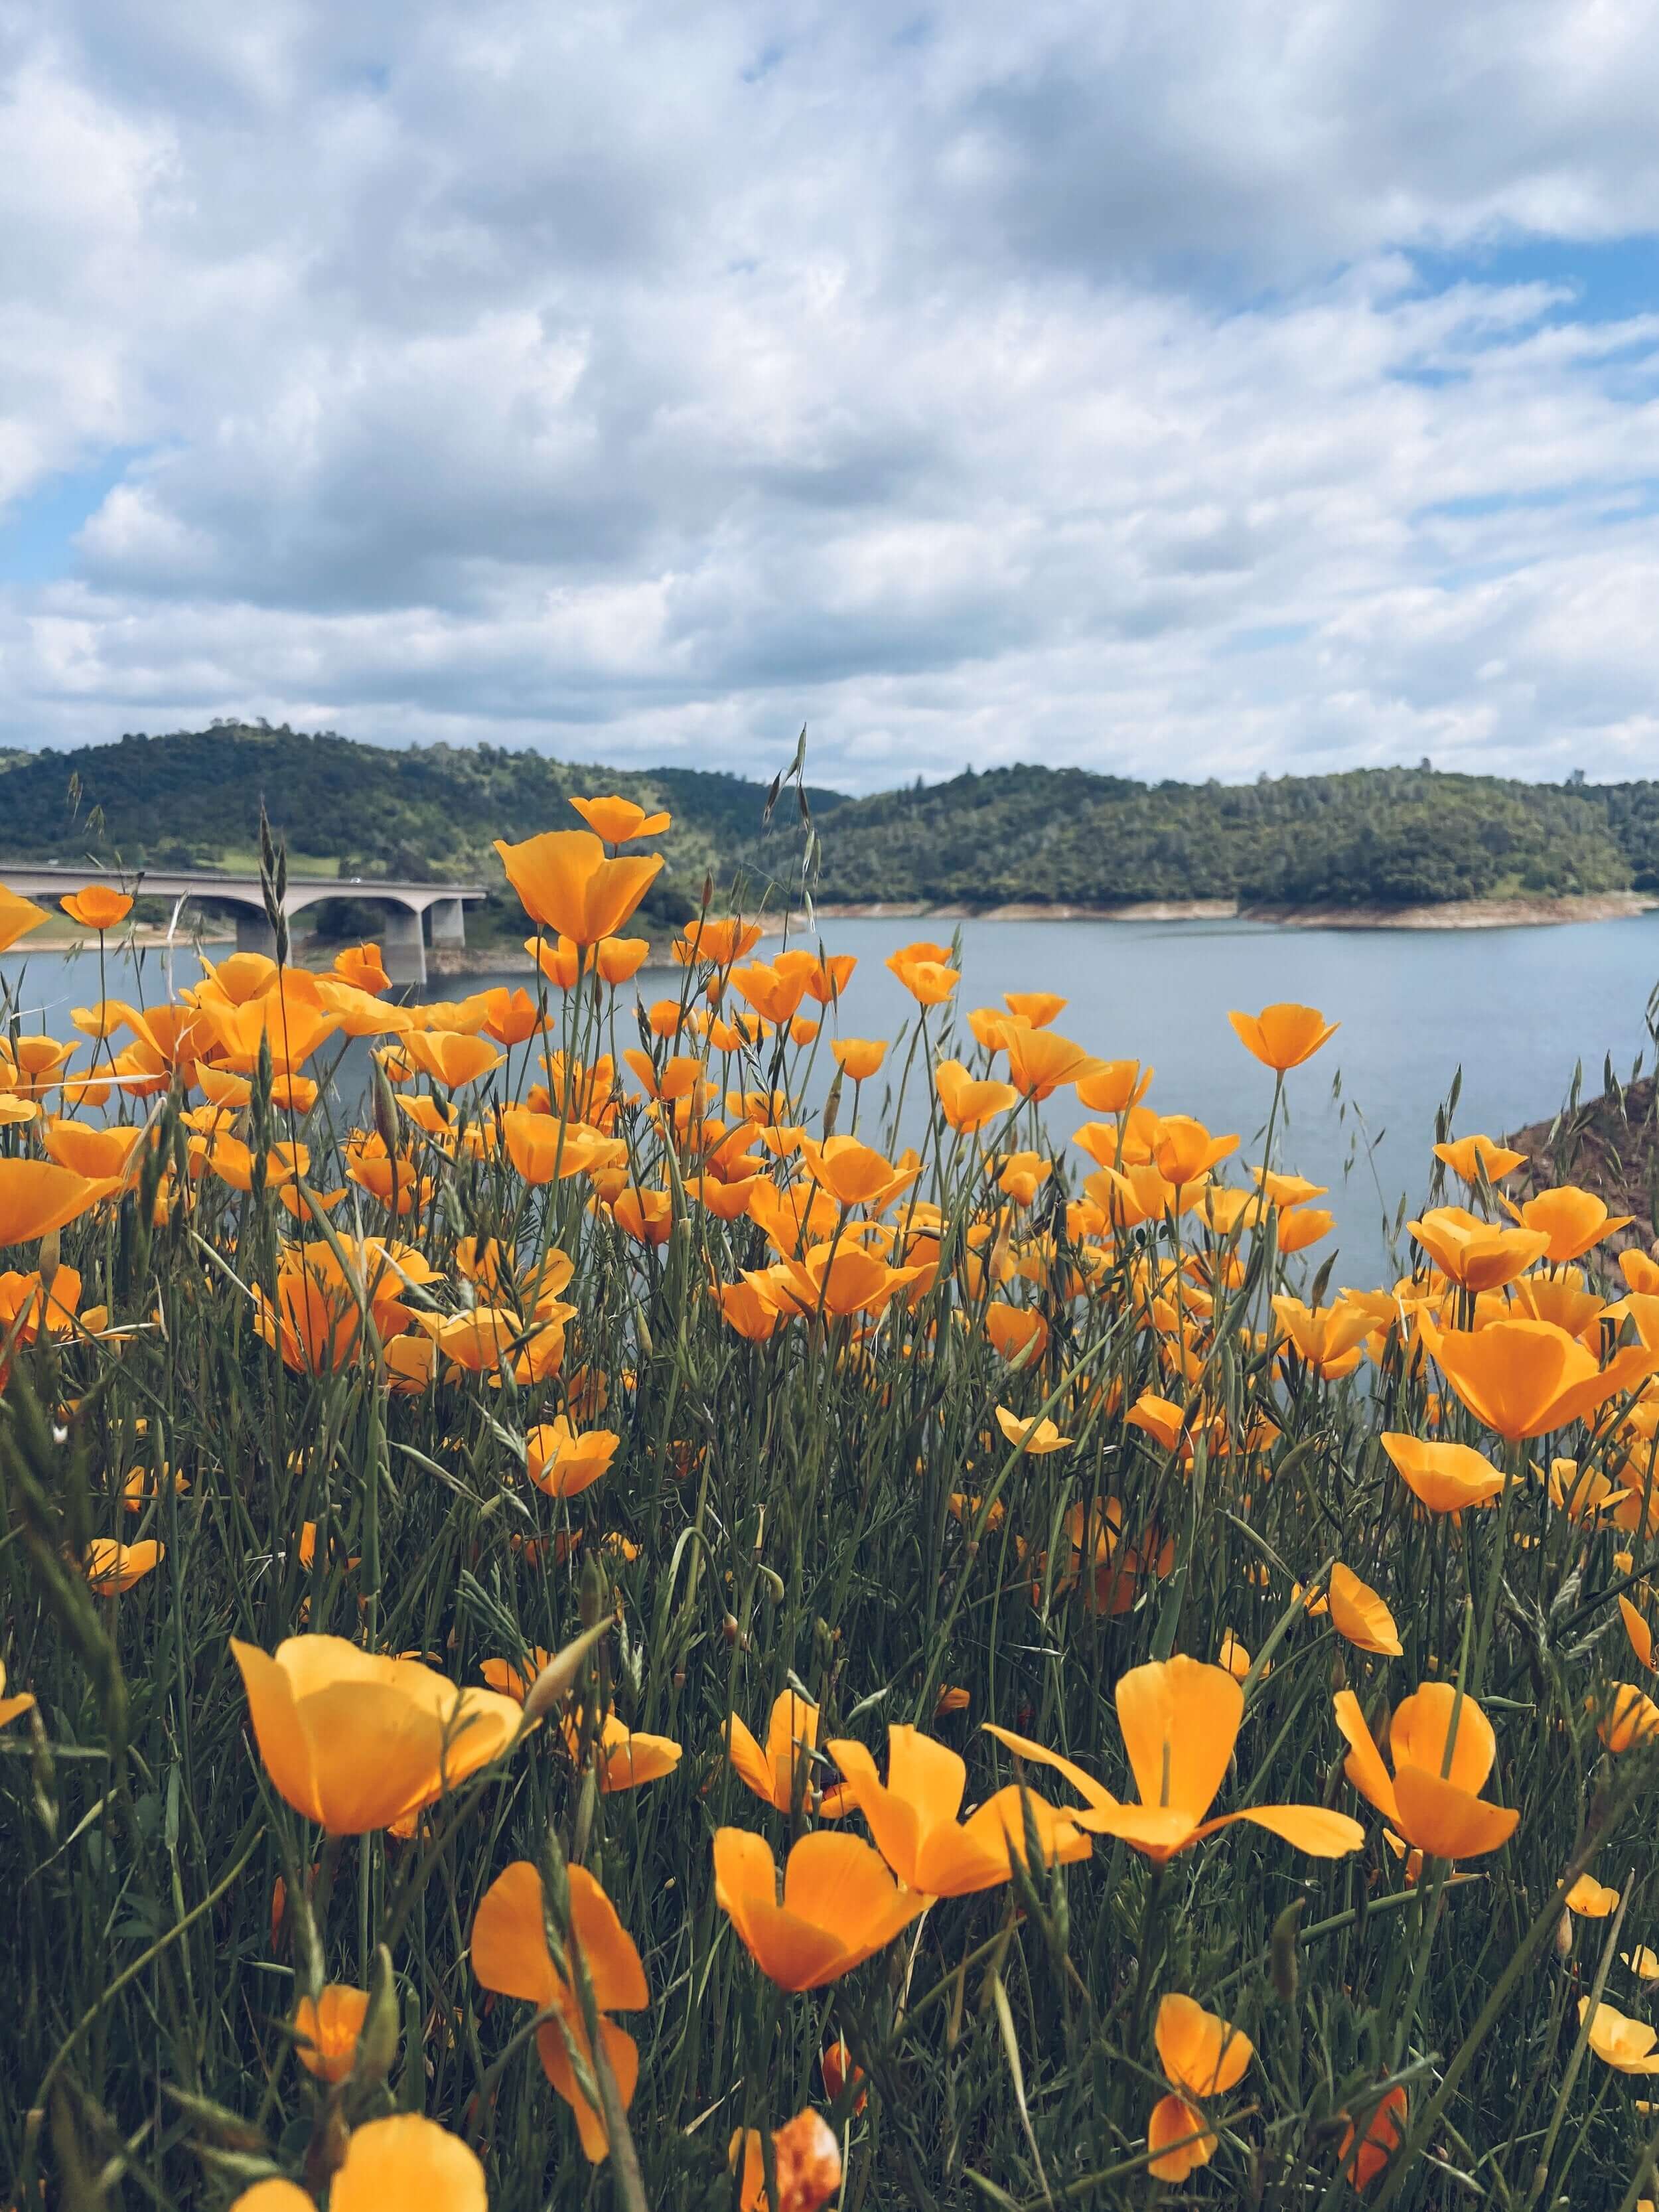 California Golden Poppies in bloom next to a bridge crossing a resevoir.